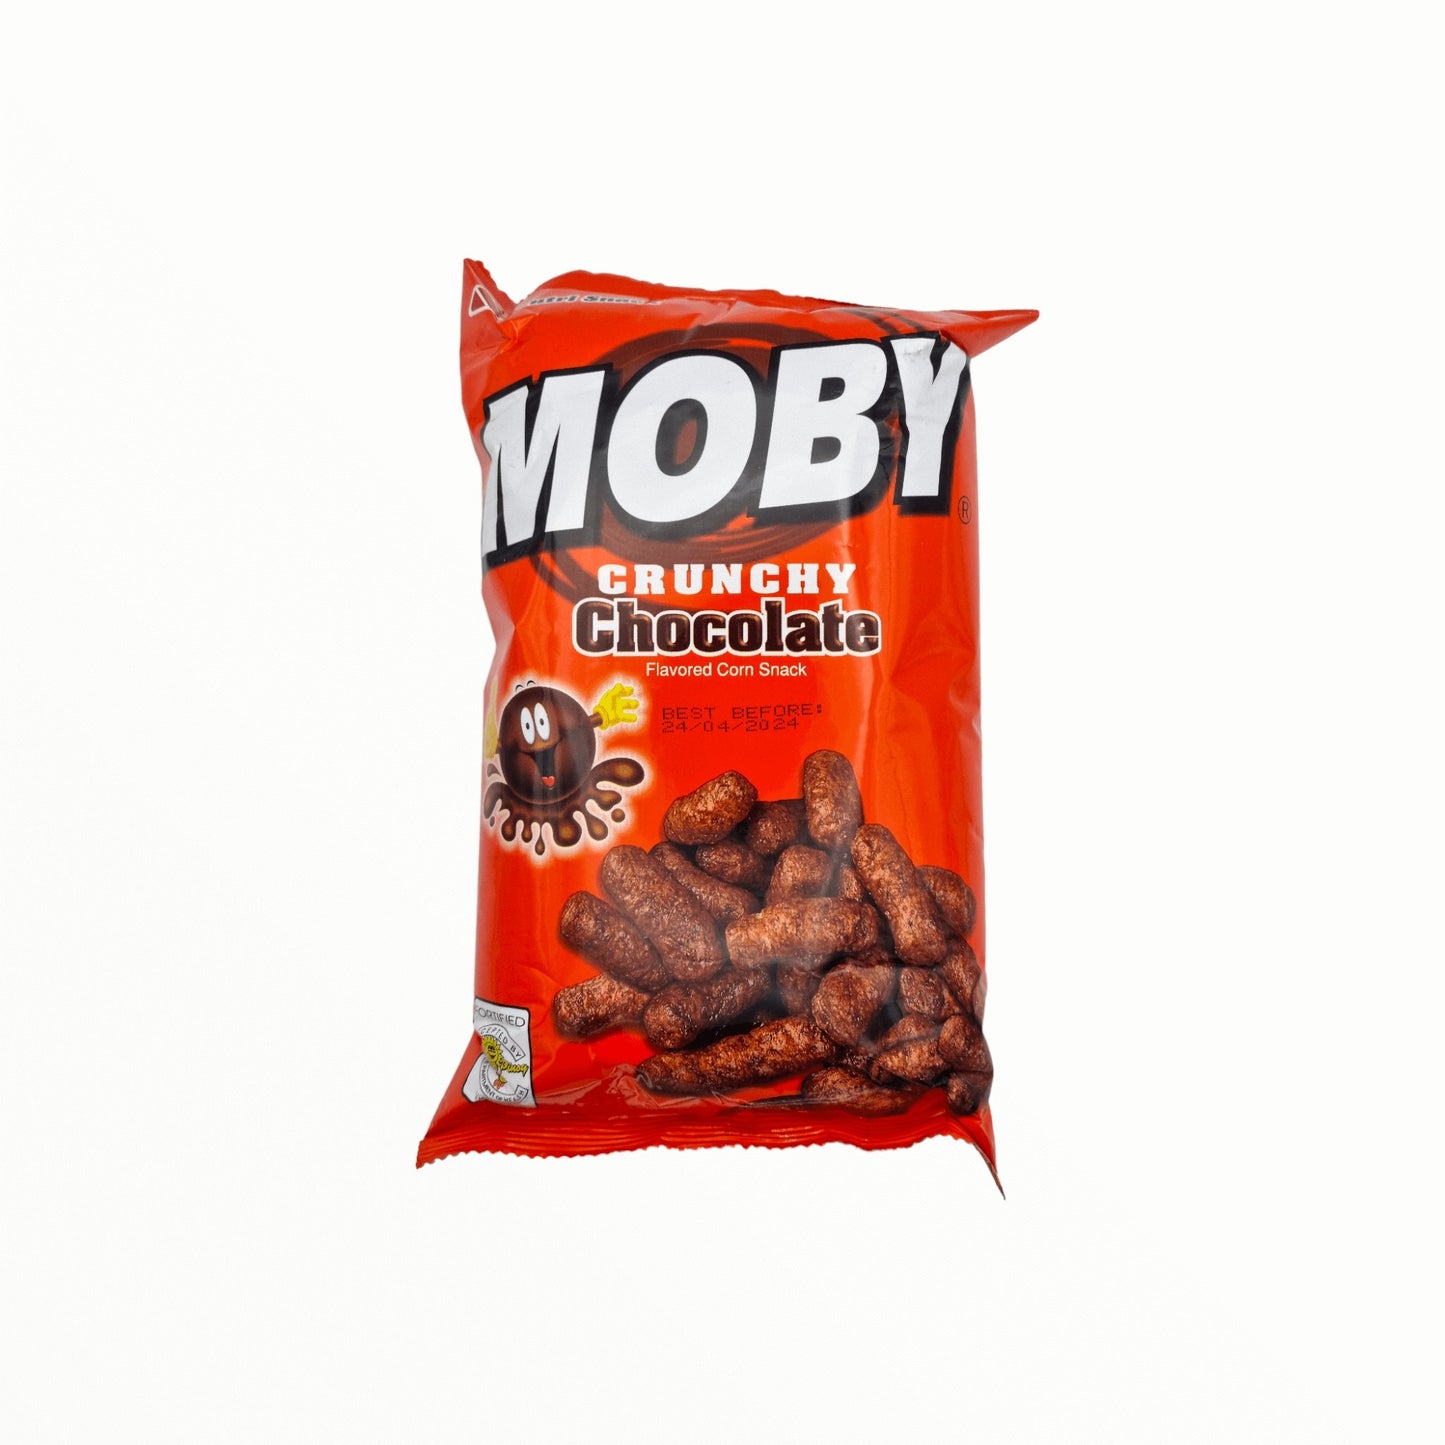 Moby Crunchy Chocolate 60g - Mabuhay Pinoy Asia Shop